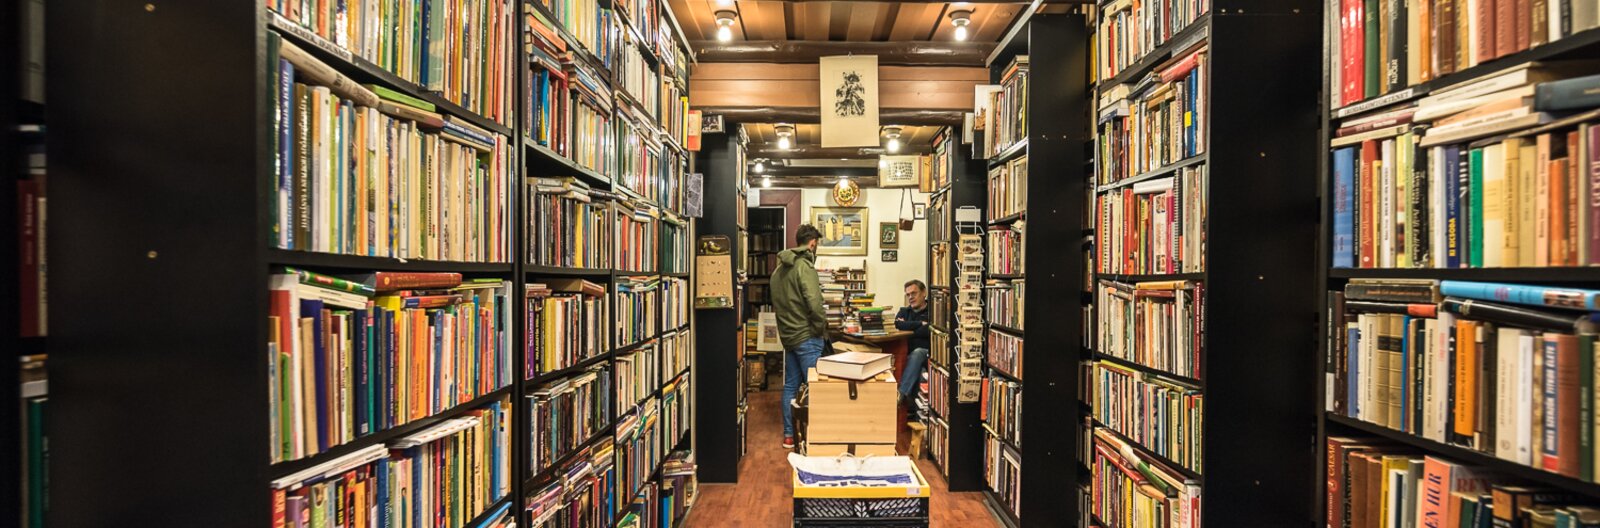 9 of the most spellbinding secondhand bookshops in Budapest